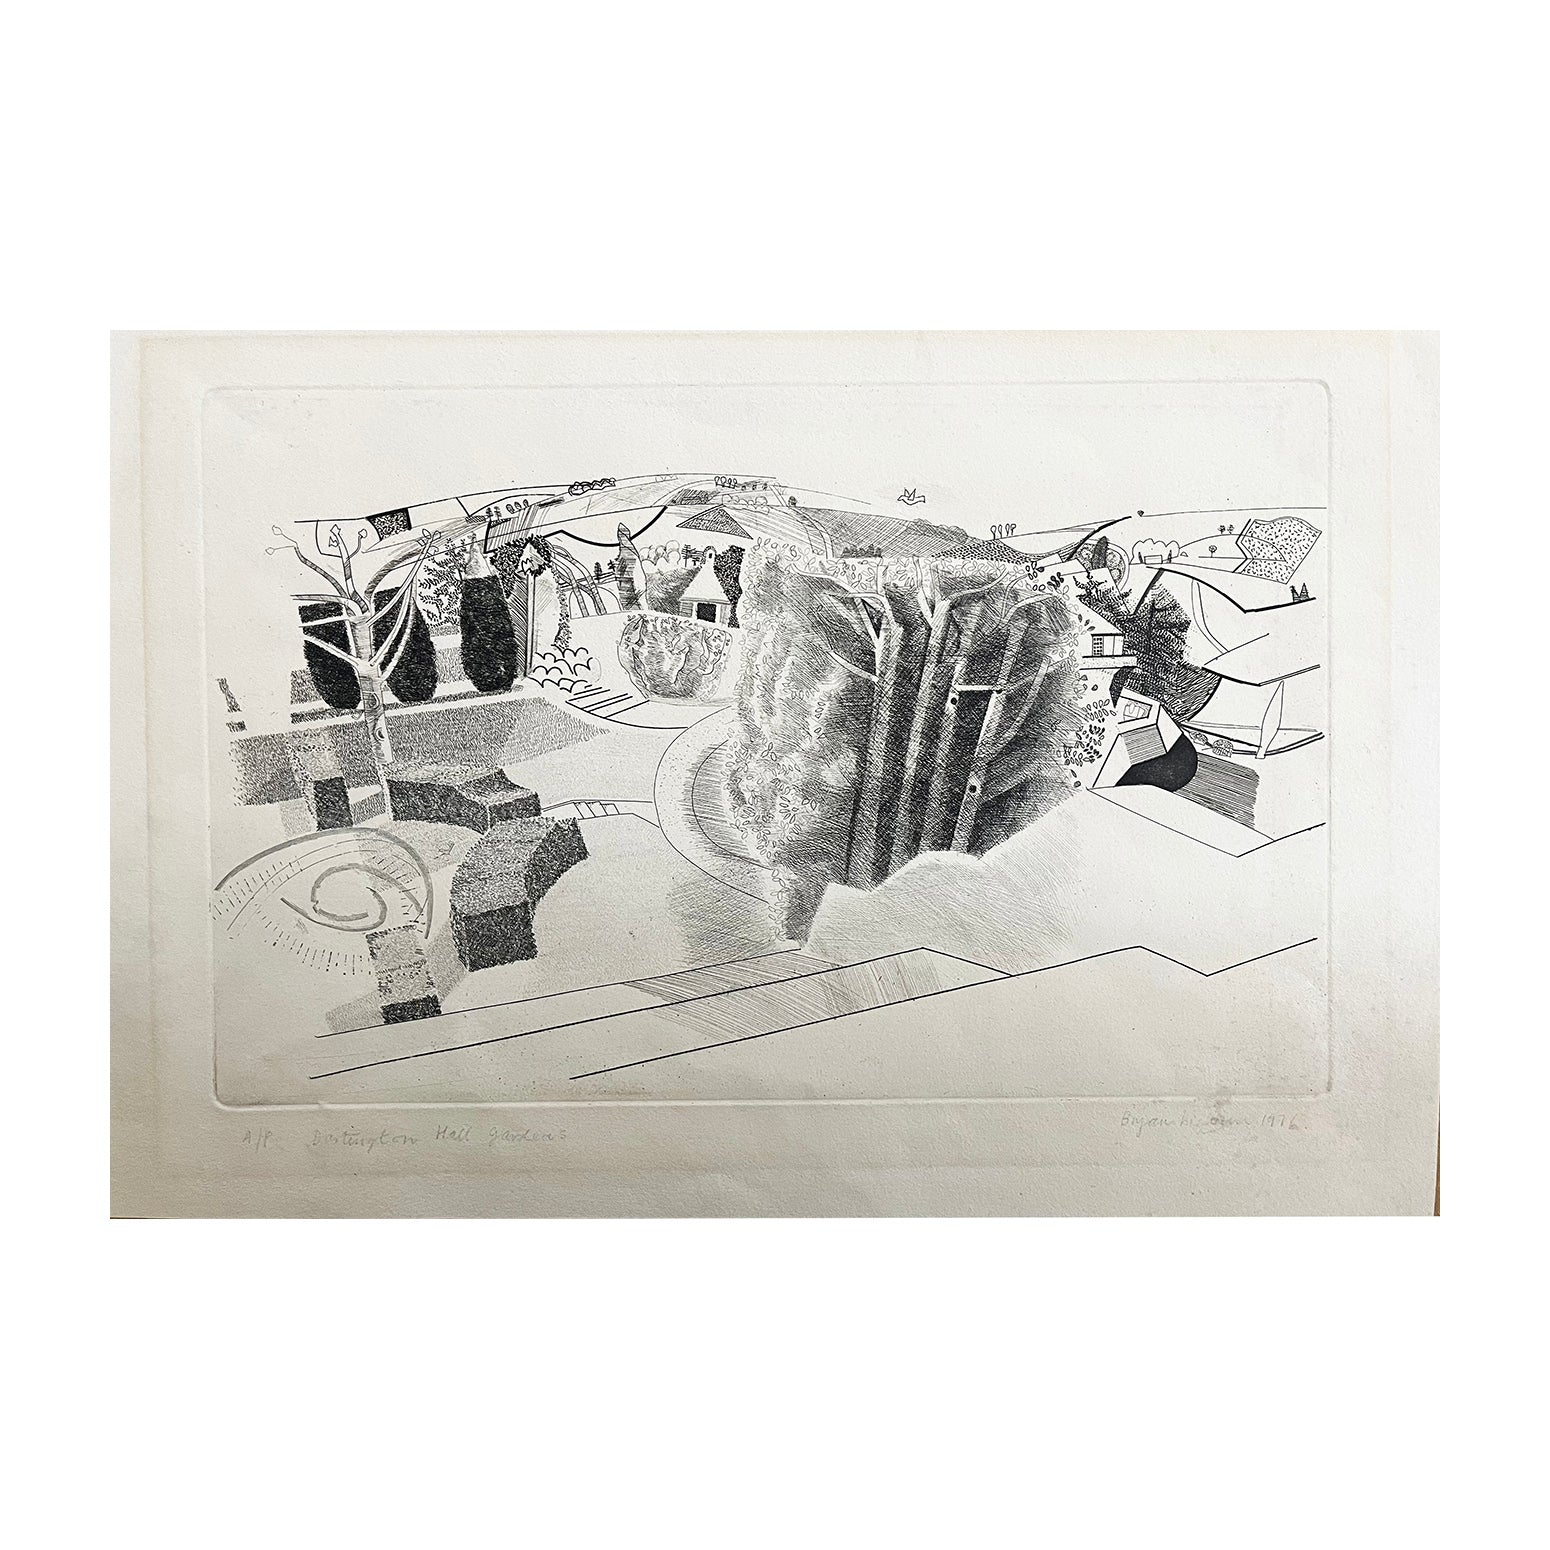 original artist’s proof, Dartington Hall Gardens, by Bryan Ingham (1936–1997), printed by Curwen Studios, 1976. Hand signed and titled in pencil. Etching & aquatint. 